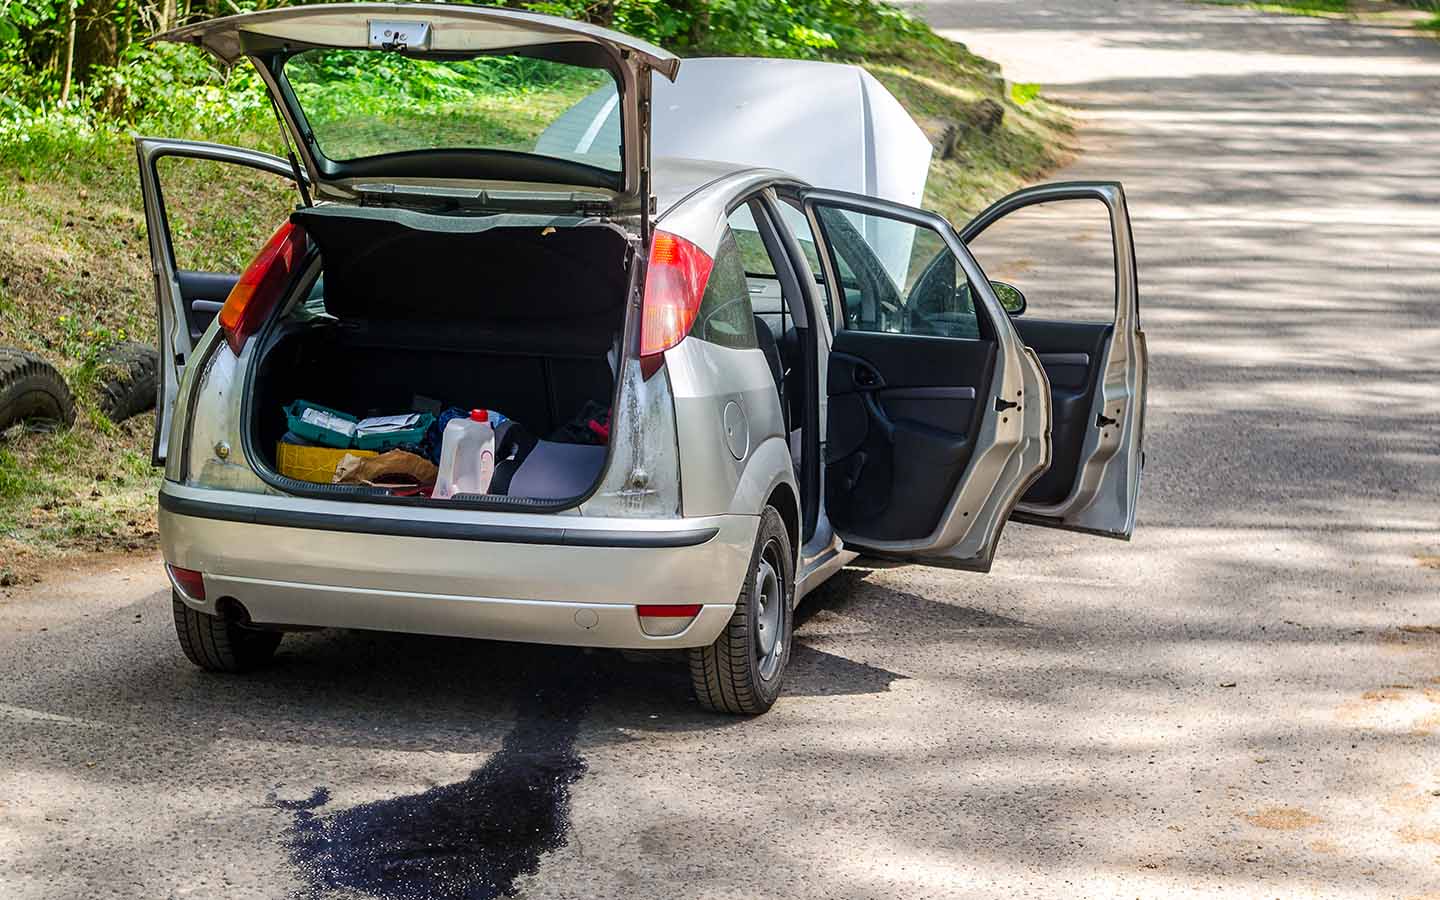 if the hydraulic system gets damaged, liquids may fall from the car